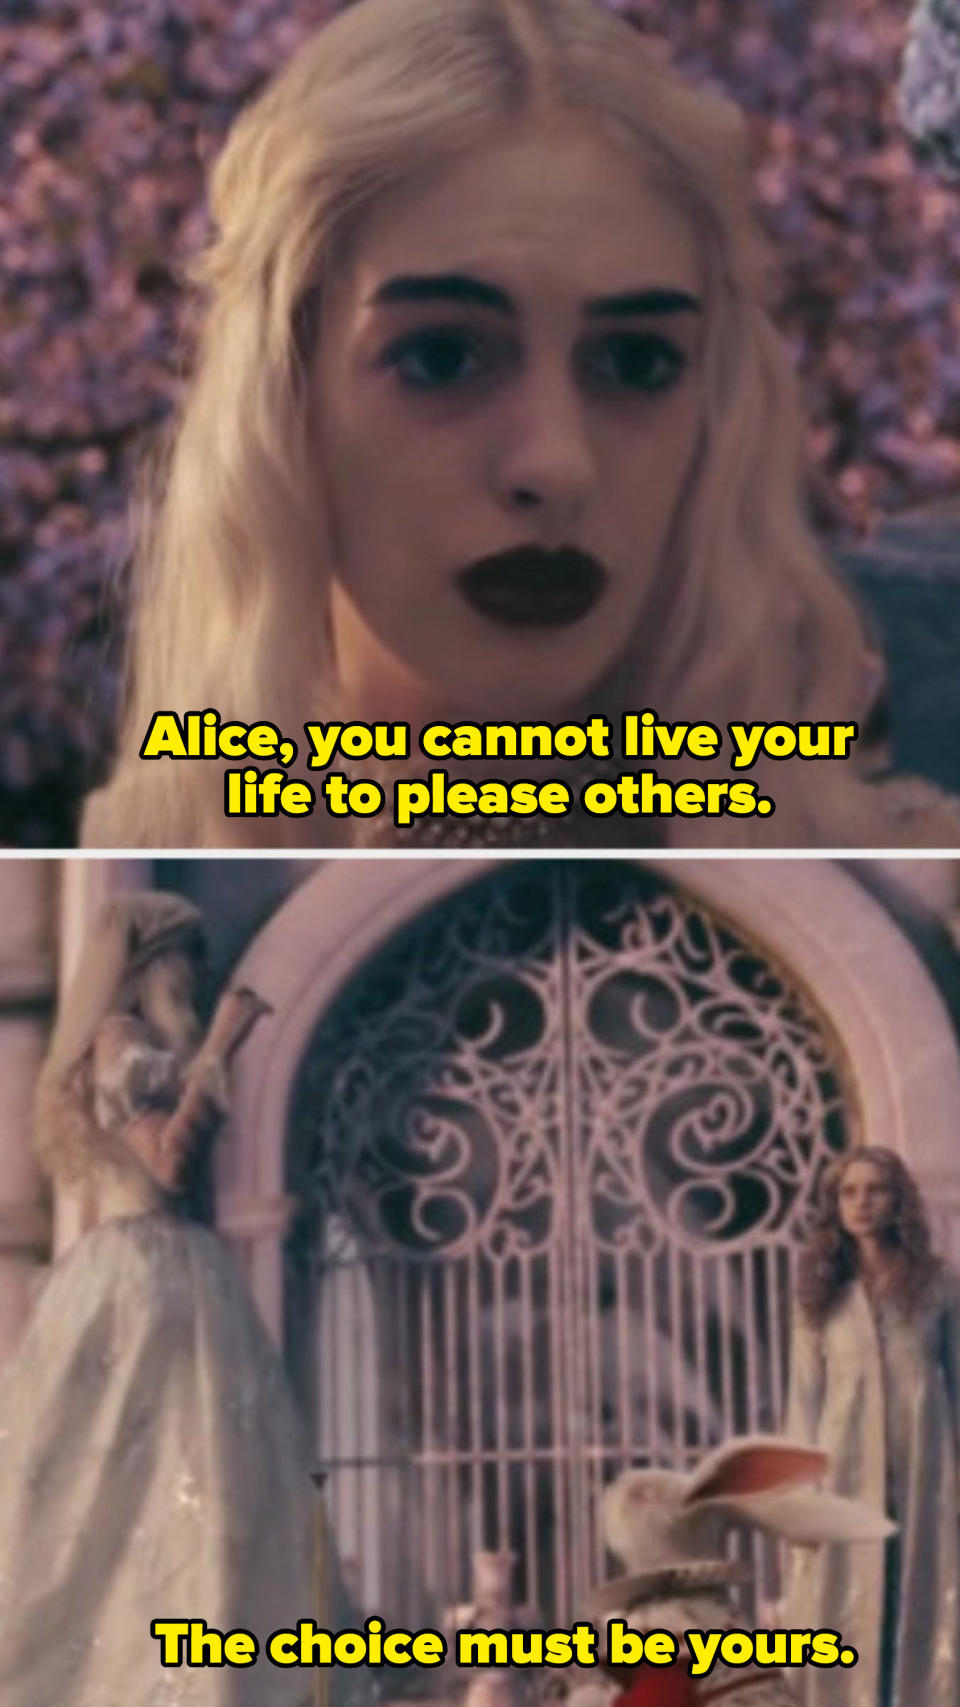 The White Queen telling Alice: "Alice, you cannot live your life to please others — the choice must be yours"